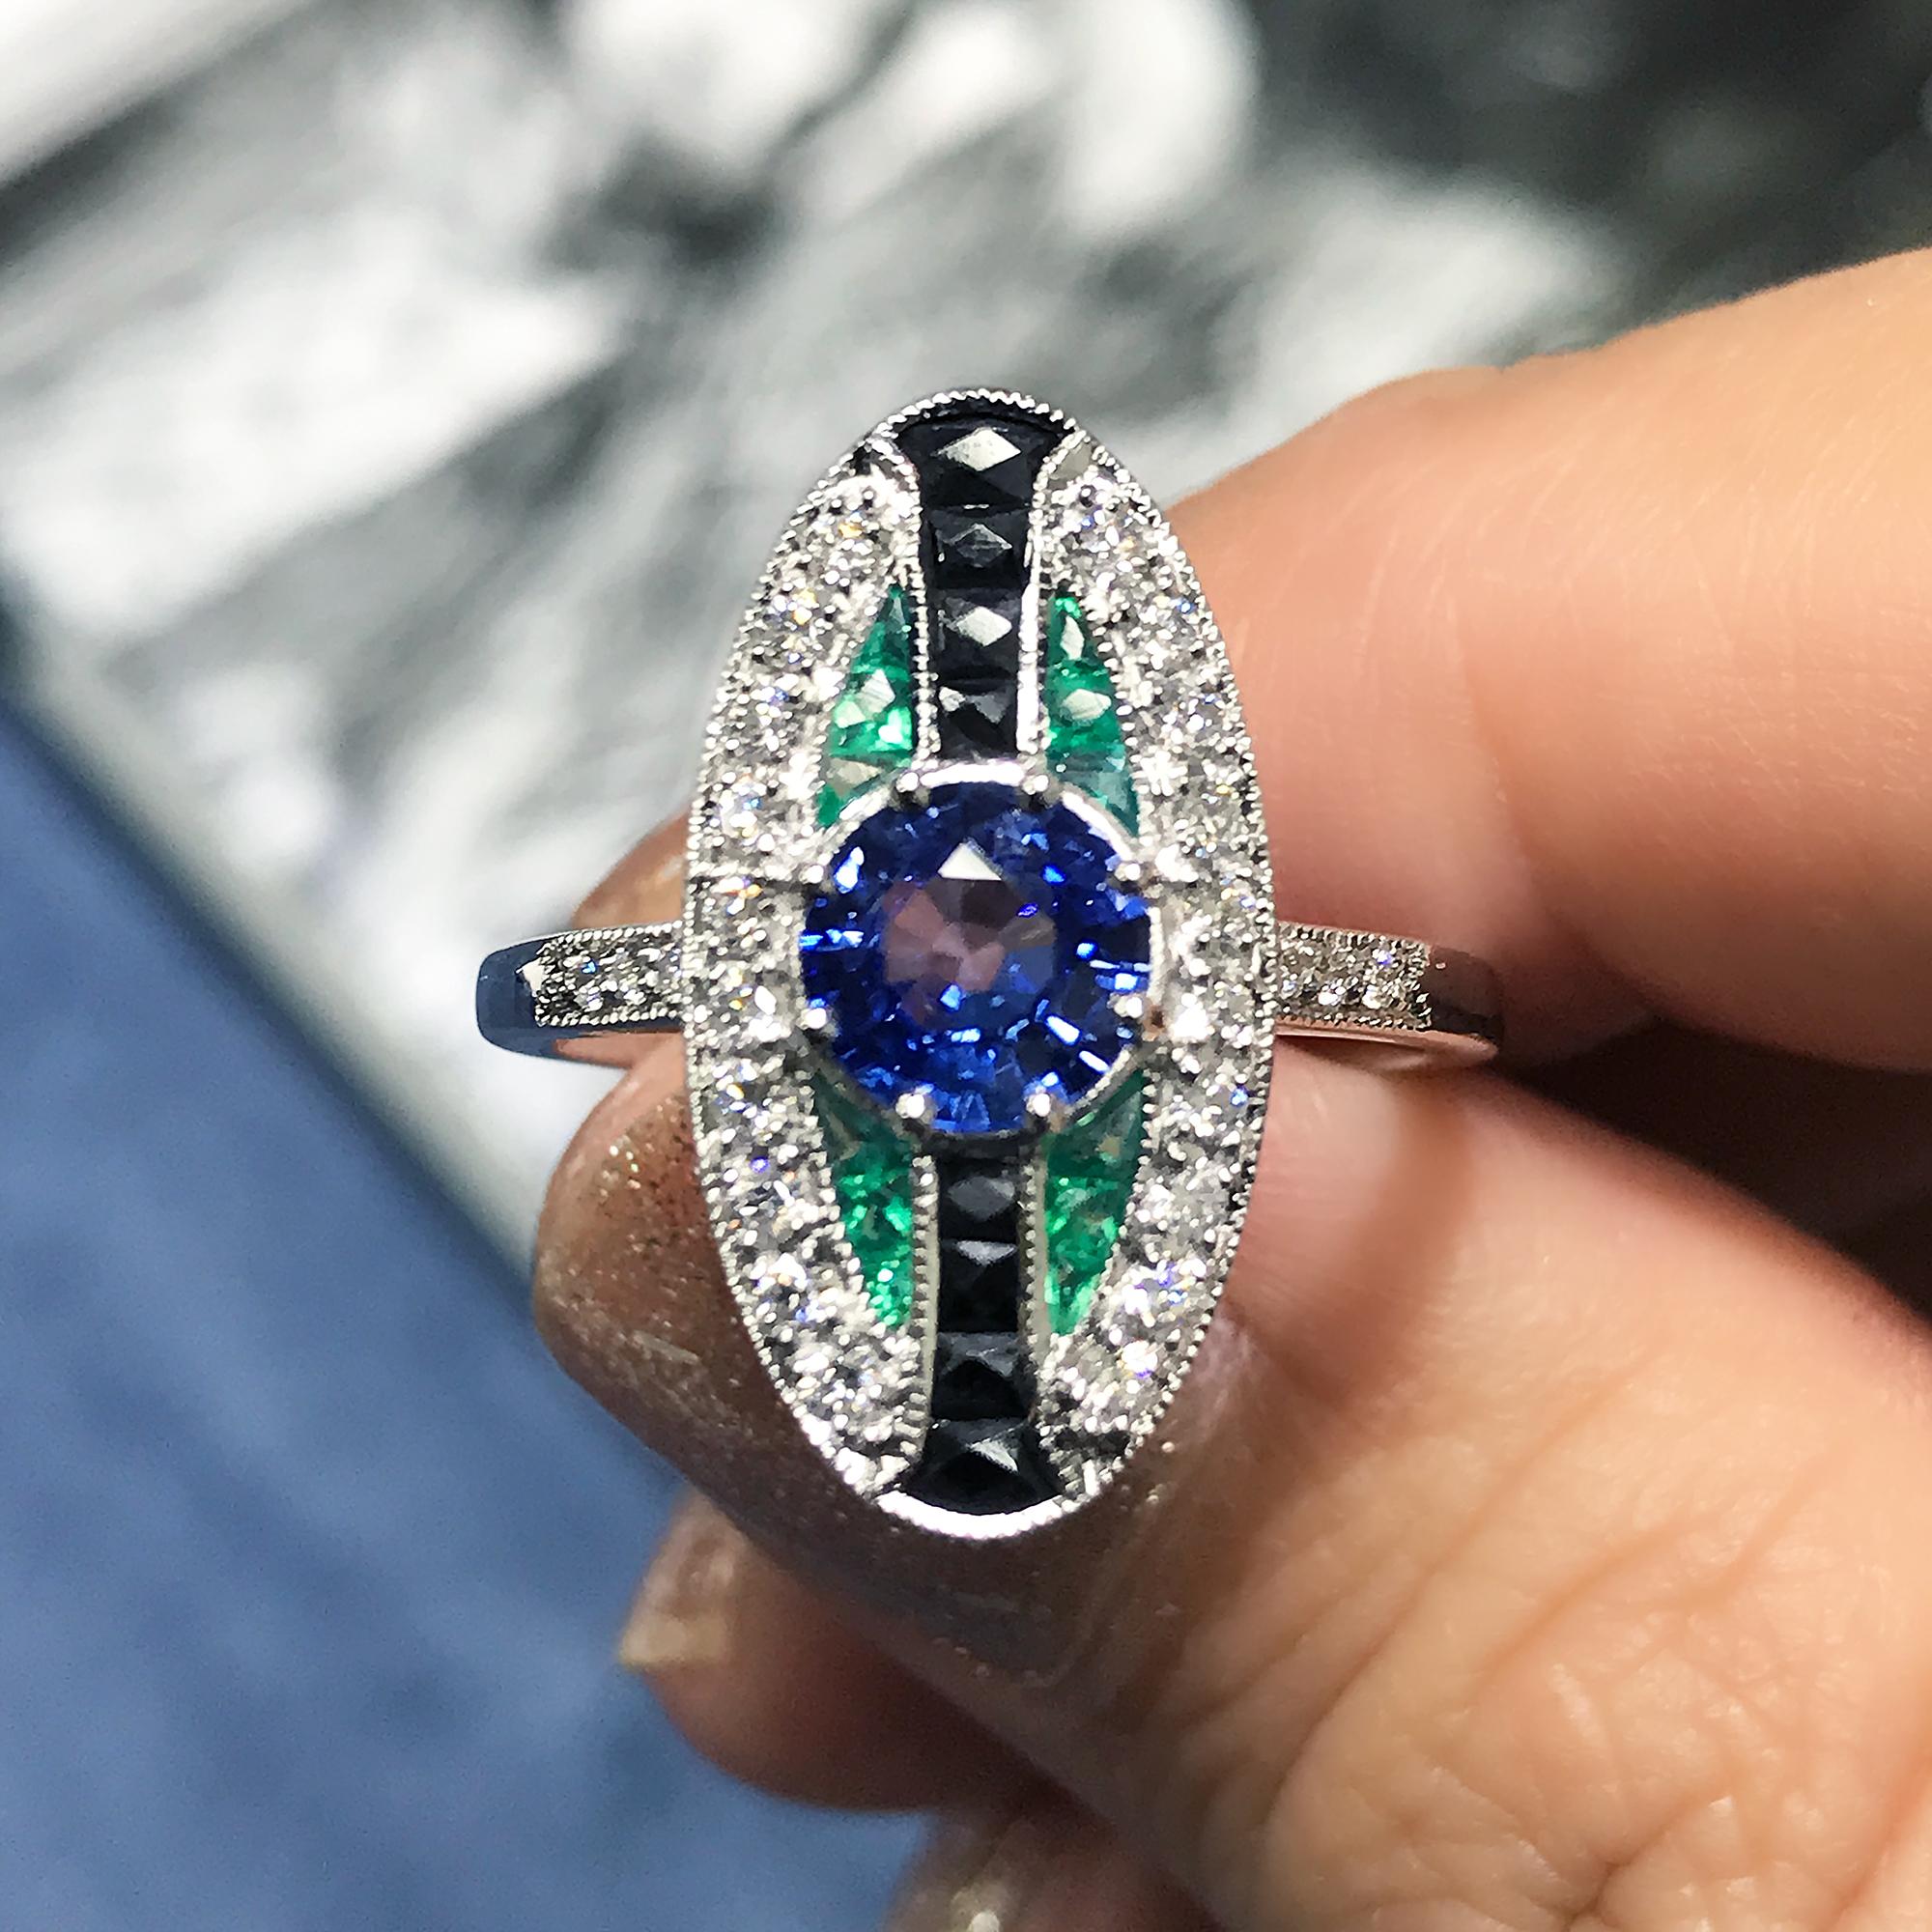 A unique Art Deco style gold ring. It features a vivid Ceylon blue sapphire in the center. On either side are French cut onyx then shaped emerald in a curved design. On the outside and shoulders are well matched white diamonds. There is millgrain